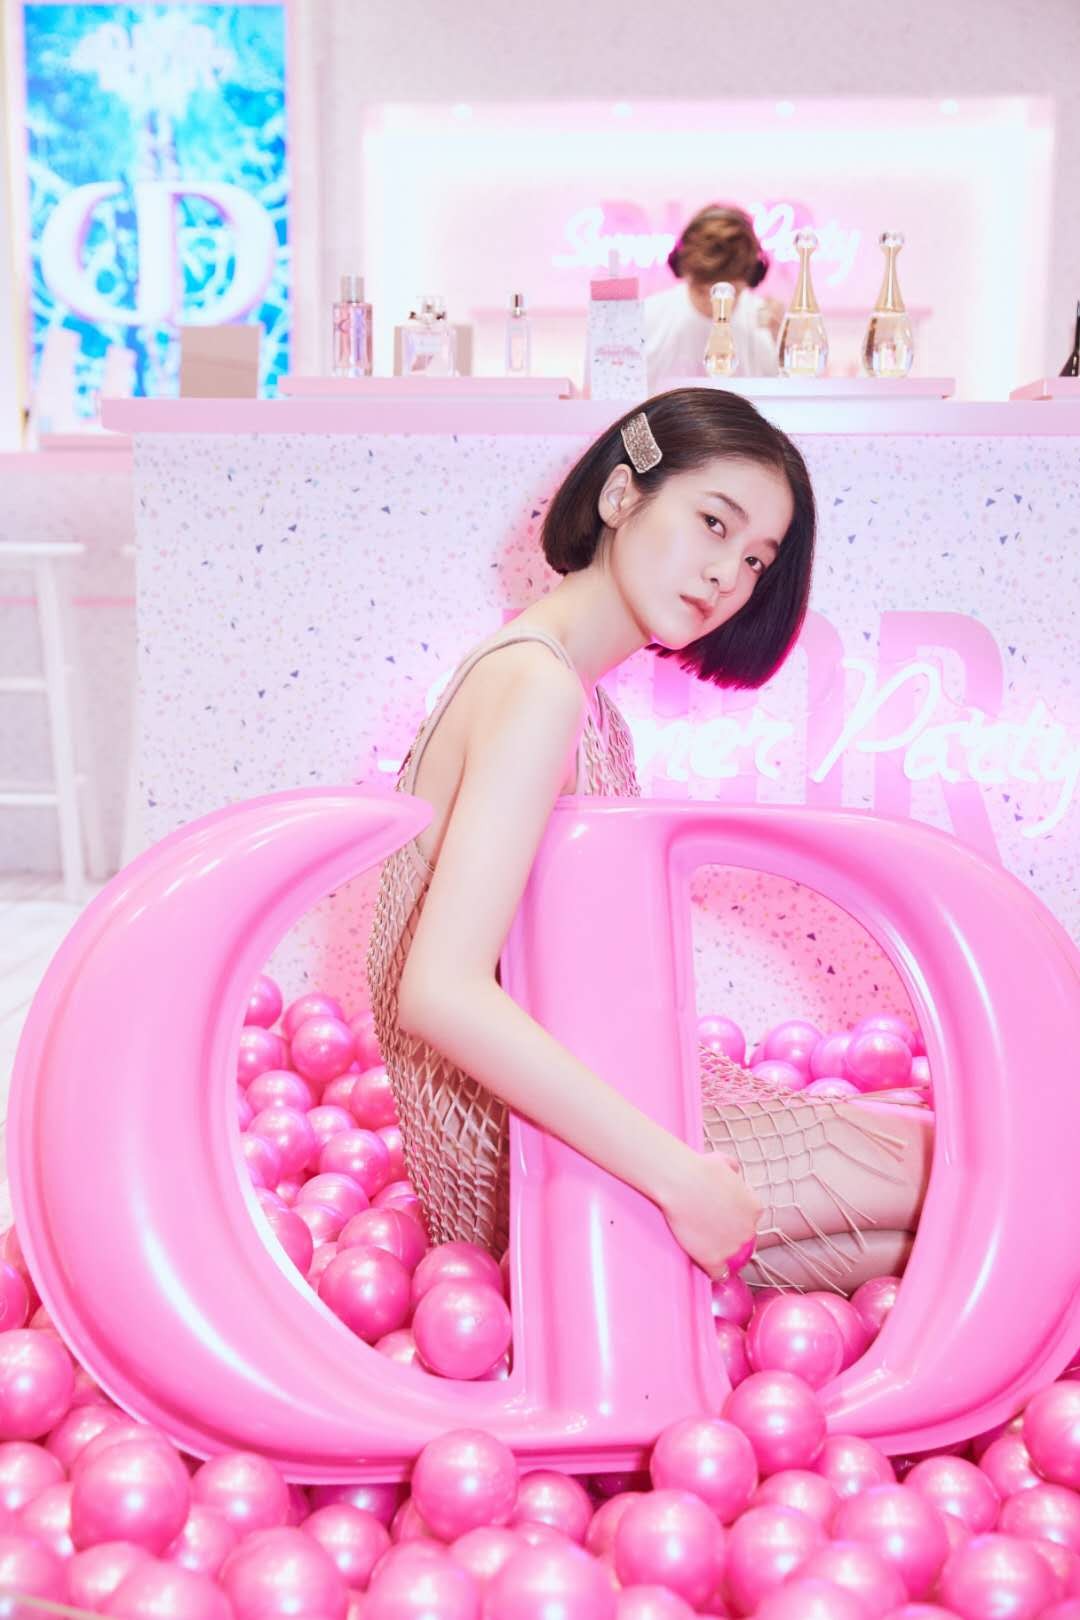 China’s Dior ambassador, actress Sophie Zhang, at the pool at the summer party celebrating the opening of Dior’s pop-up store in Macau.